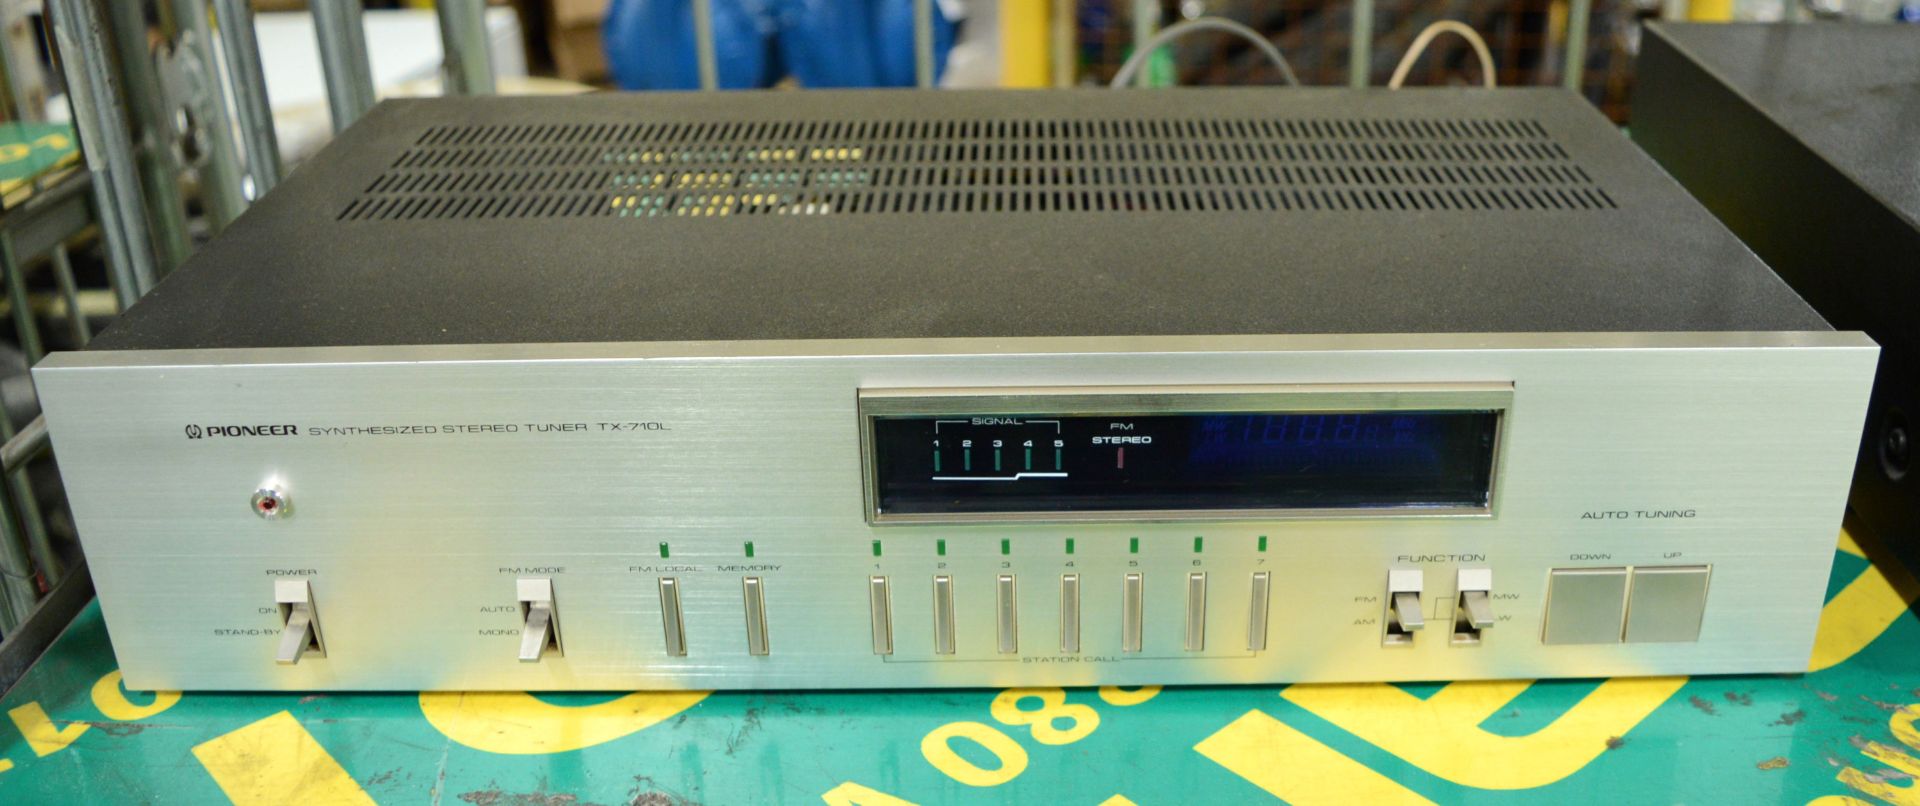 Pioneer TX-710L Tuner & CT-300 Stereo Cassette Tape Deck. - Image 2 of 3